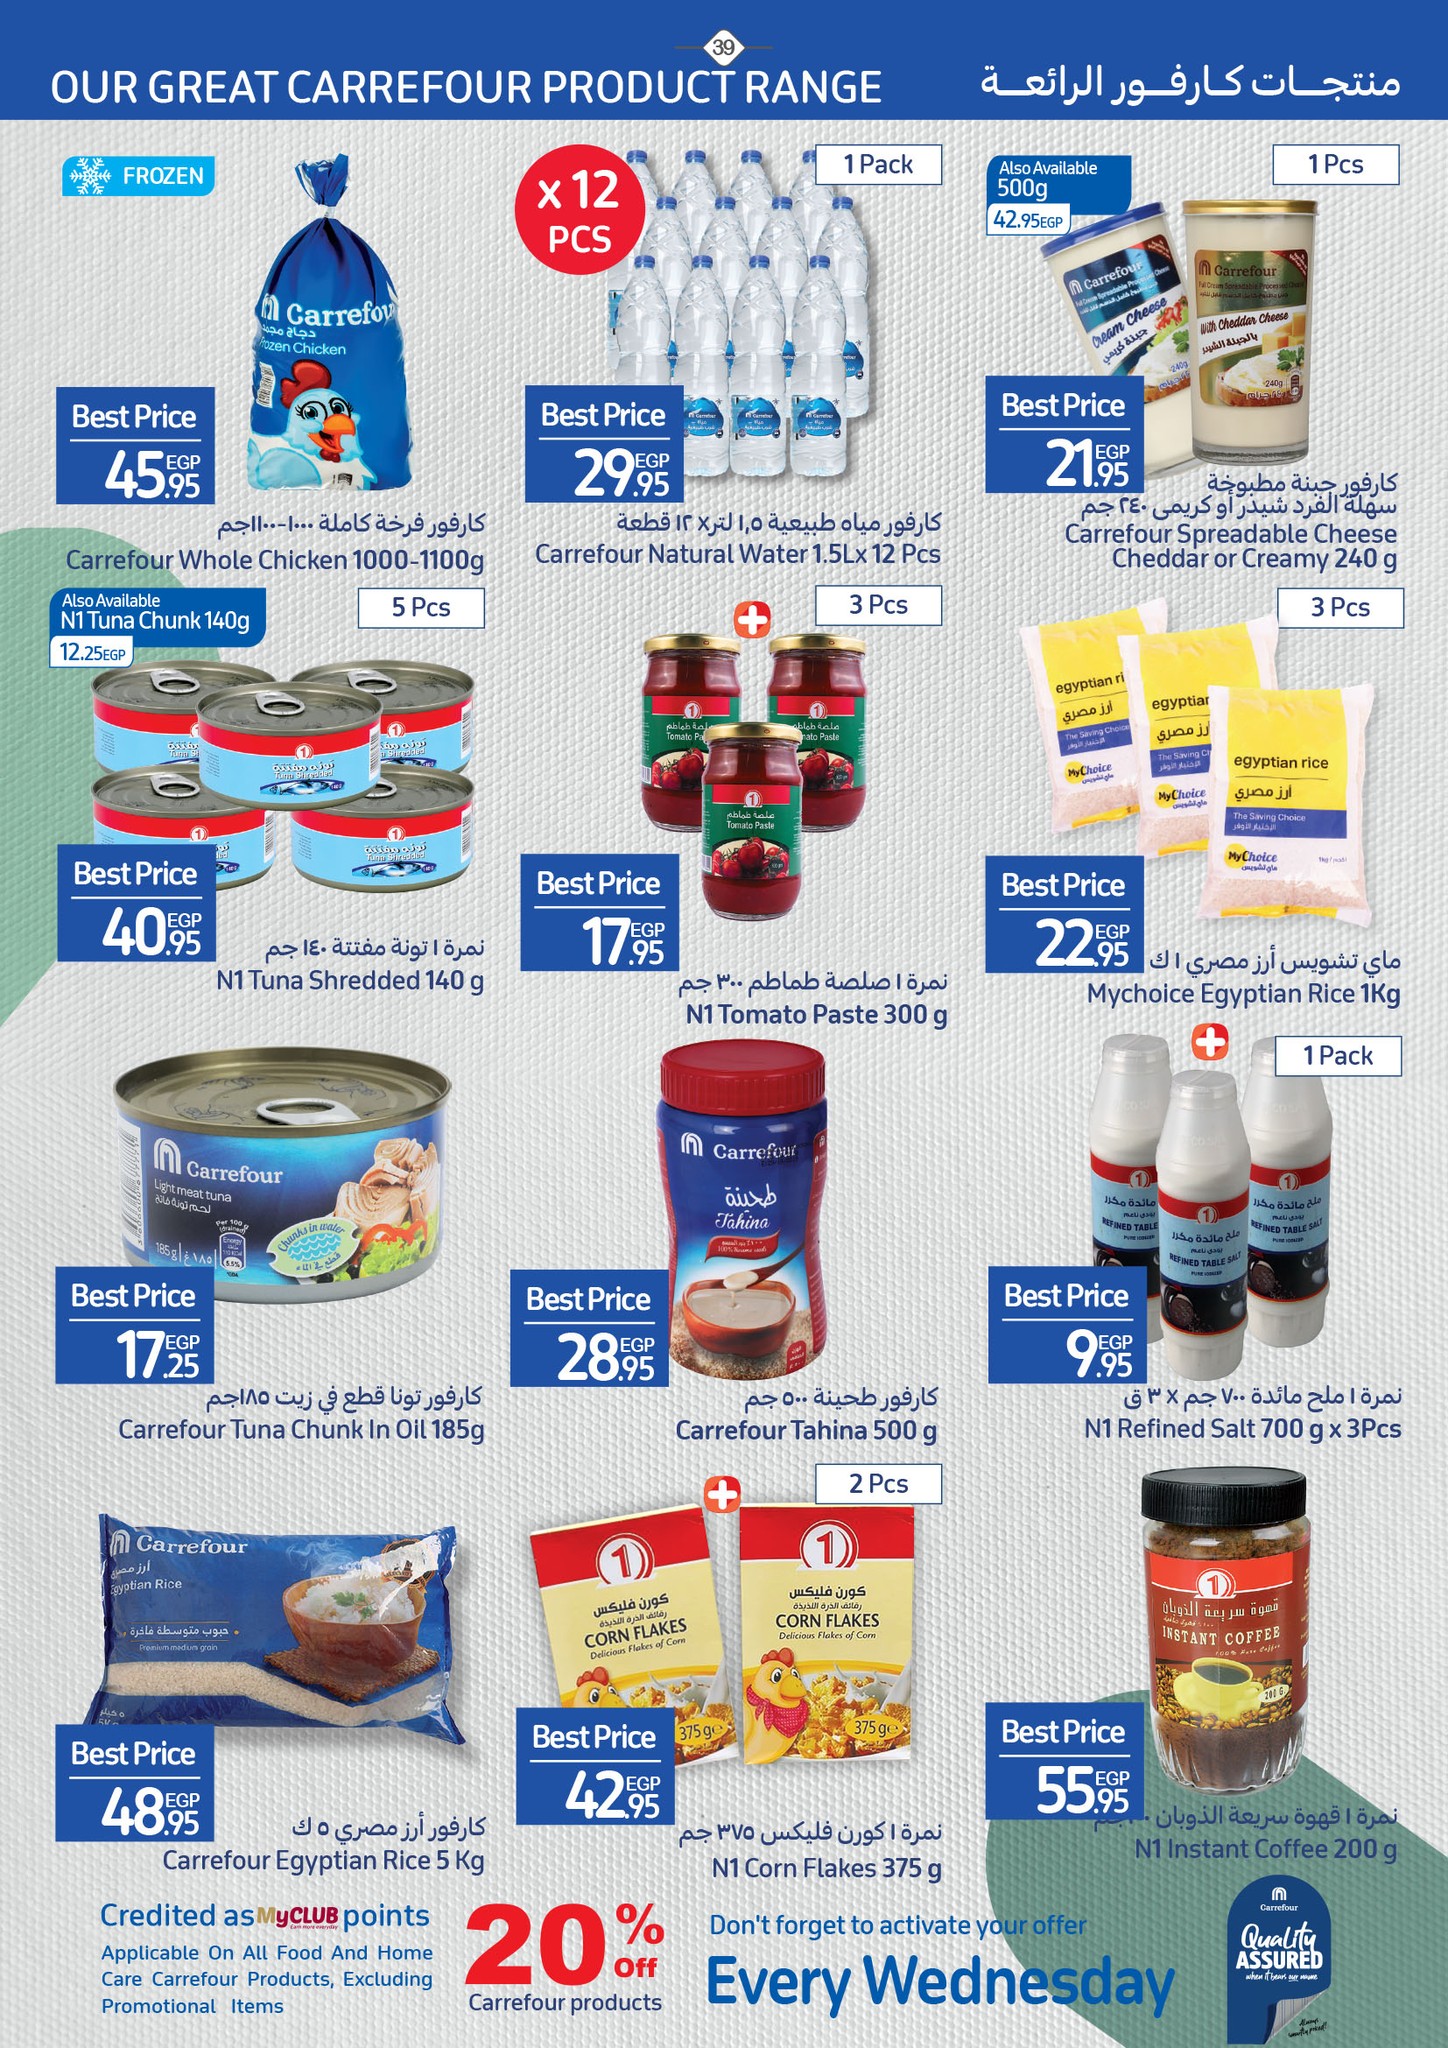 Watch the latest Carrefour half price offers "Last Chance Offer" until December 4th 39